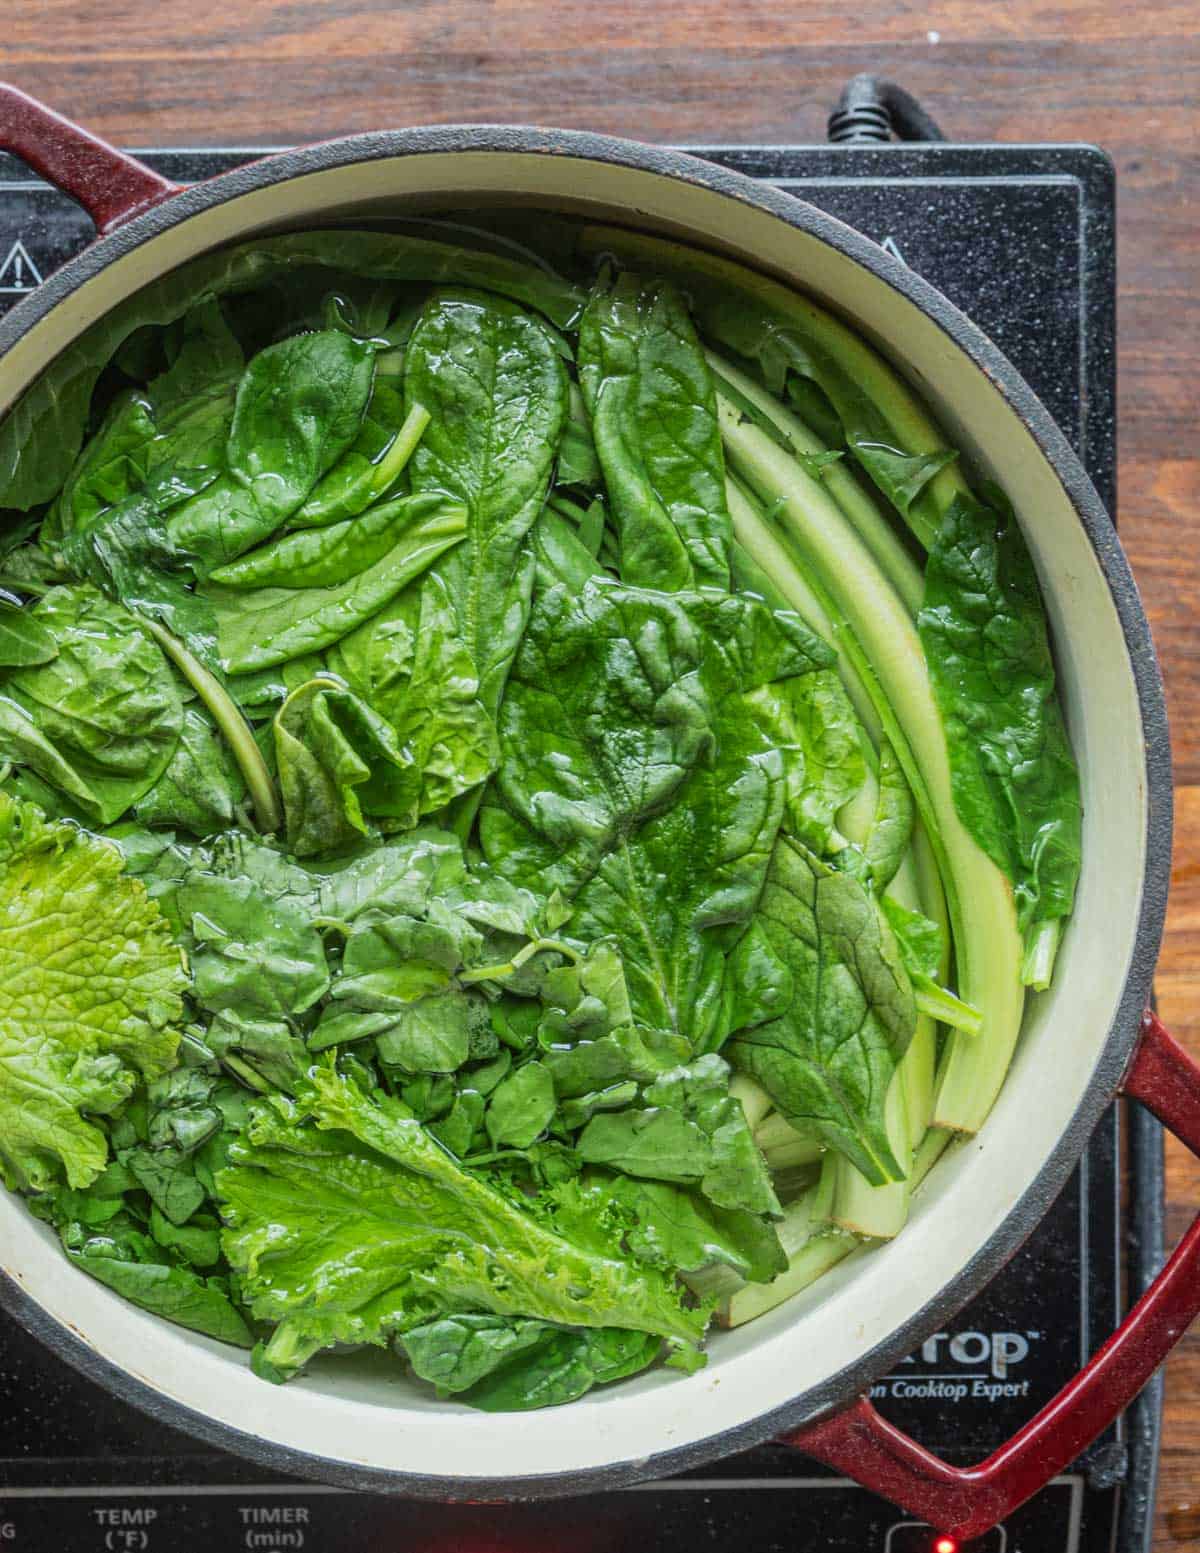 Blanching spinach and mixed greens in boiling salted water. 